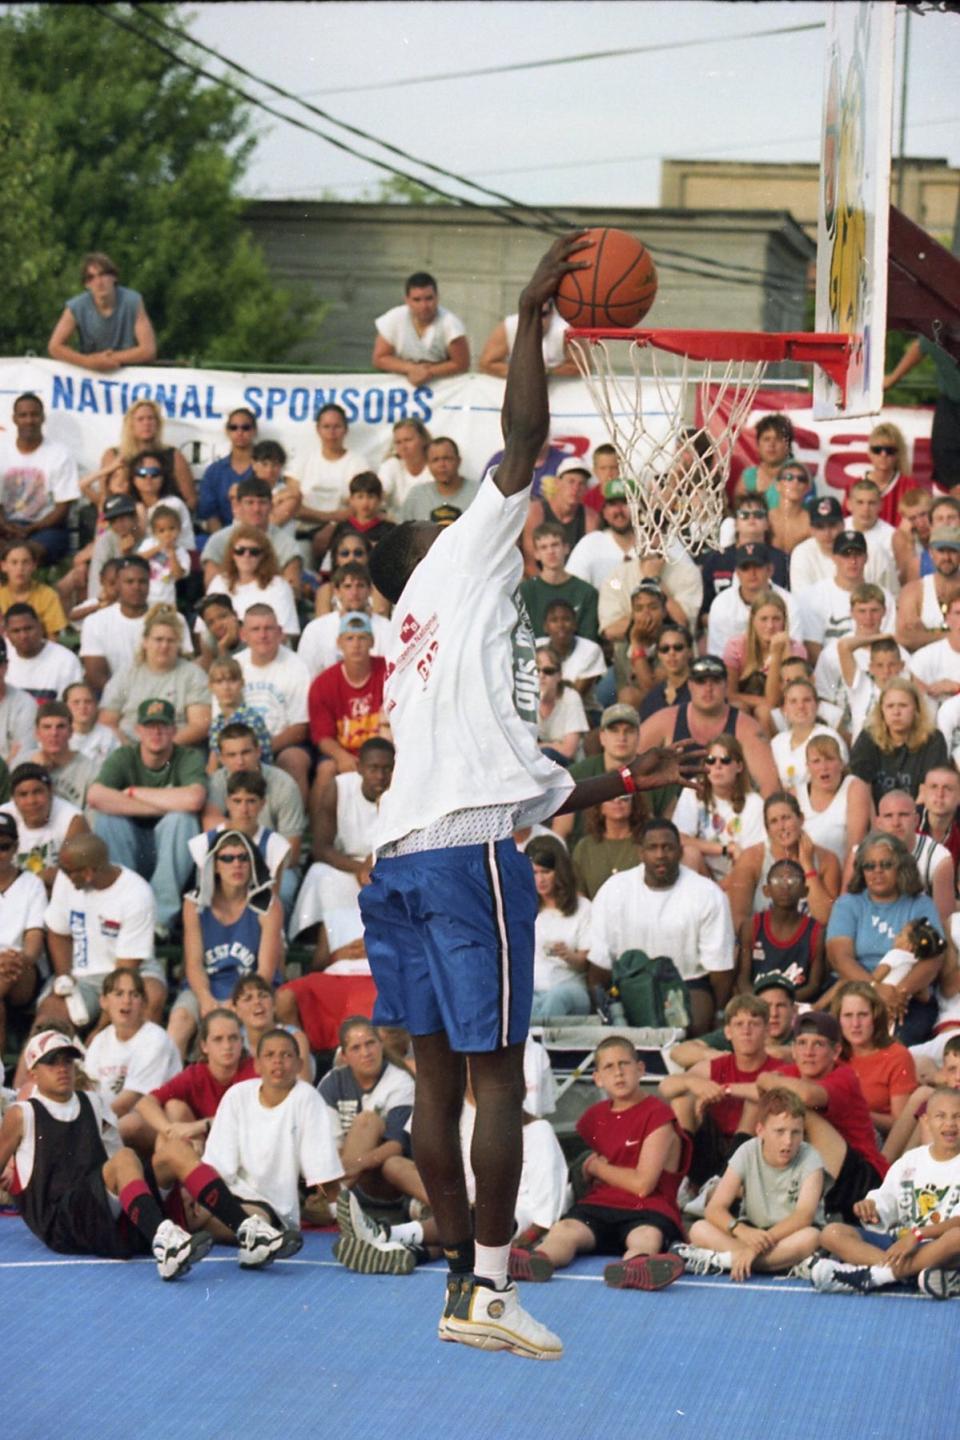 The Gus Macker 3-on-3 basketball tournament featured more than 900 teams and 3,000 players when it came to Chillicothe in June 1997.